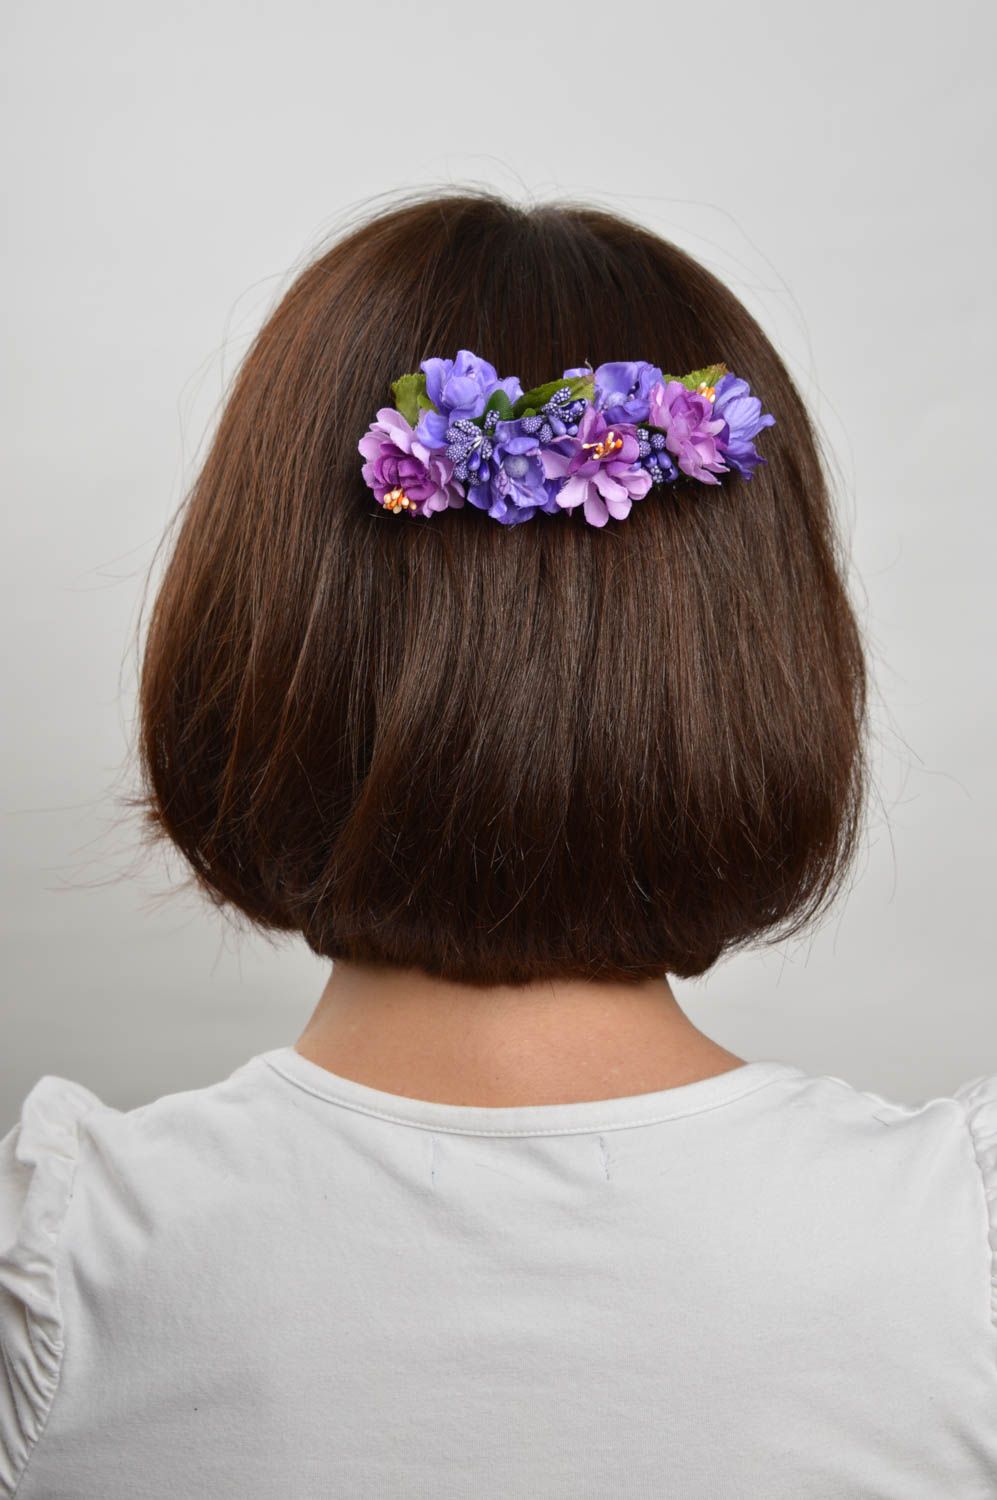 Handmade flower hair comb design how to do my hair trendy hair gifts for her photo 1